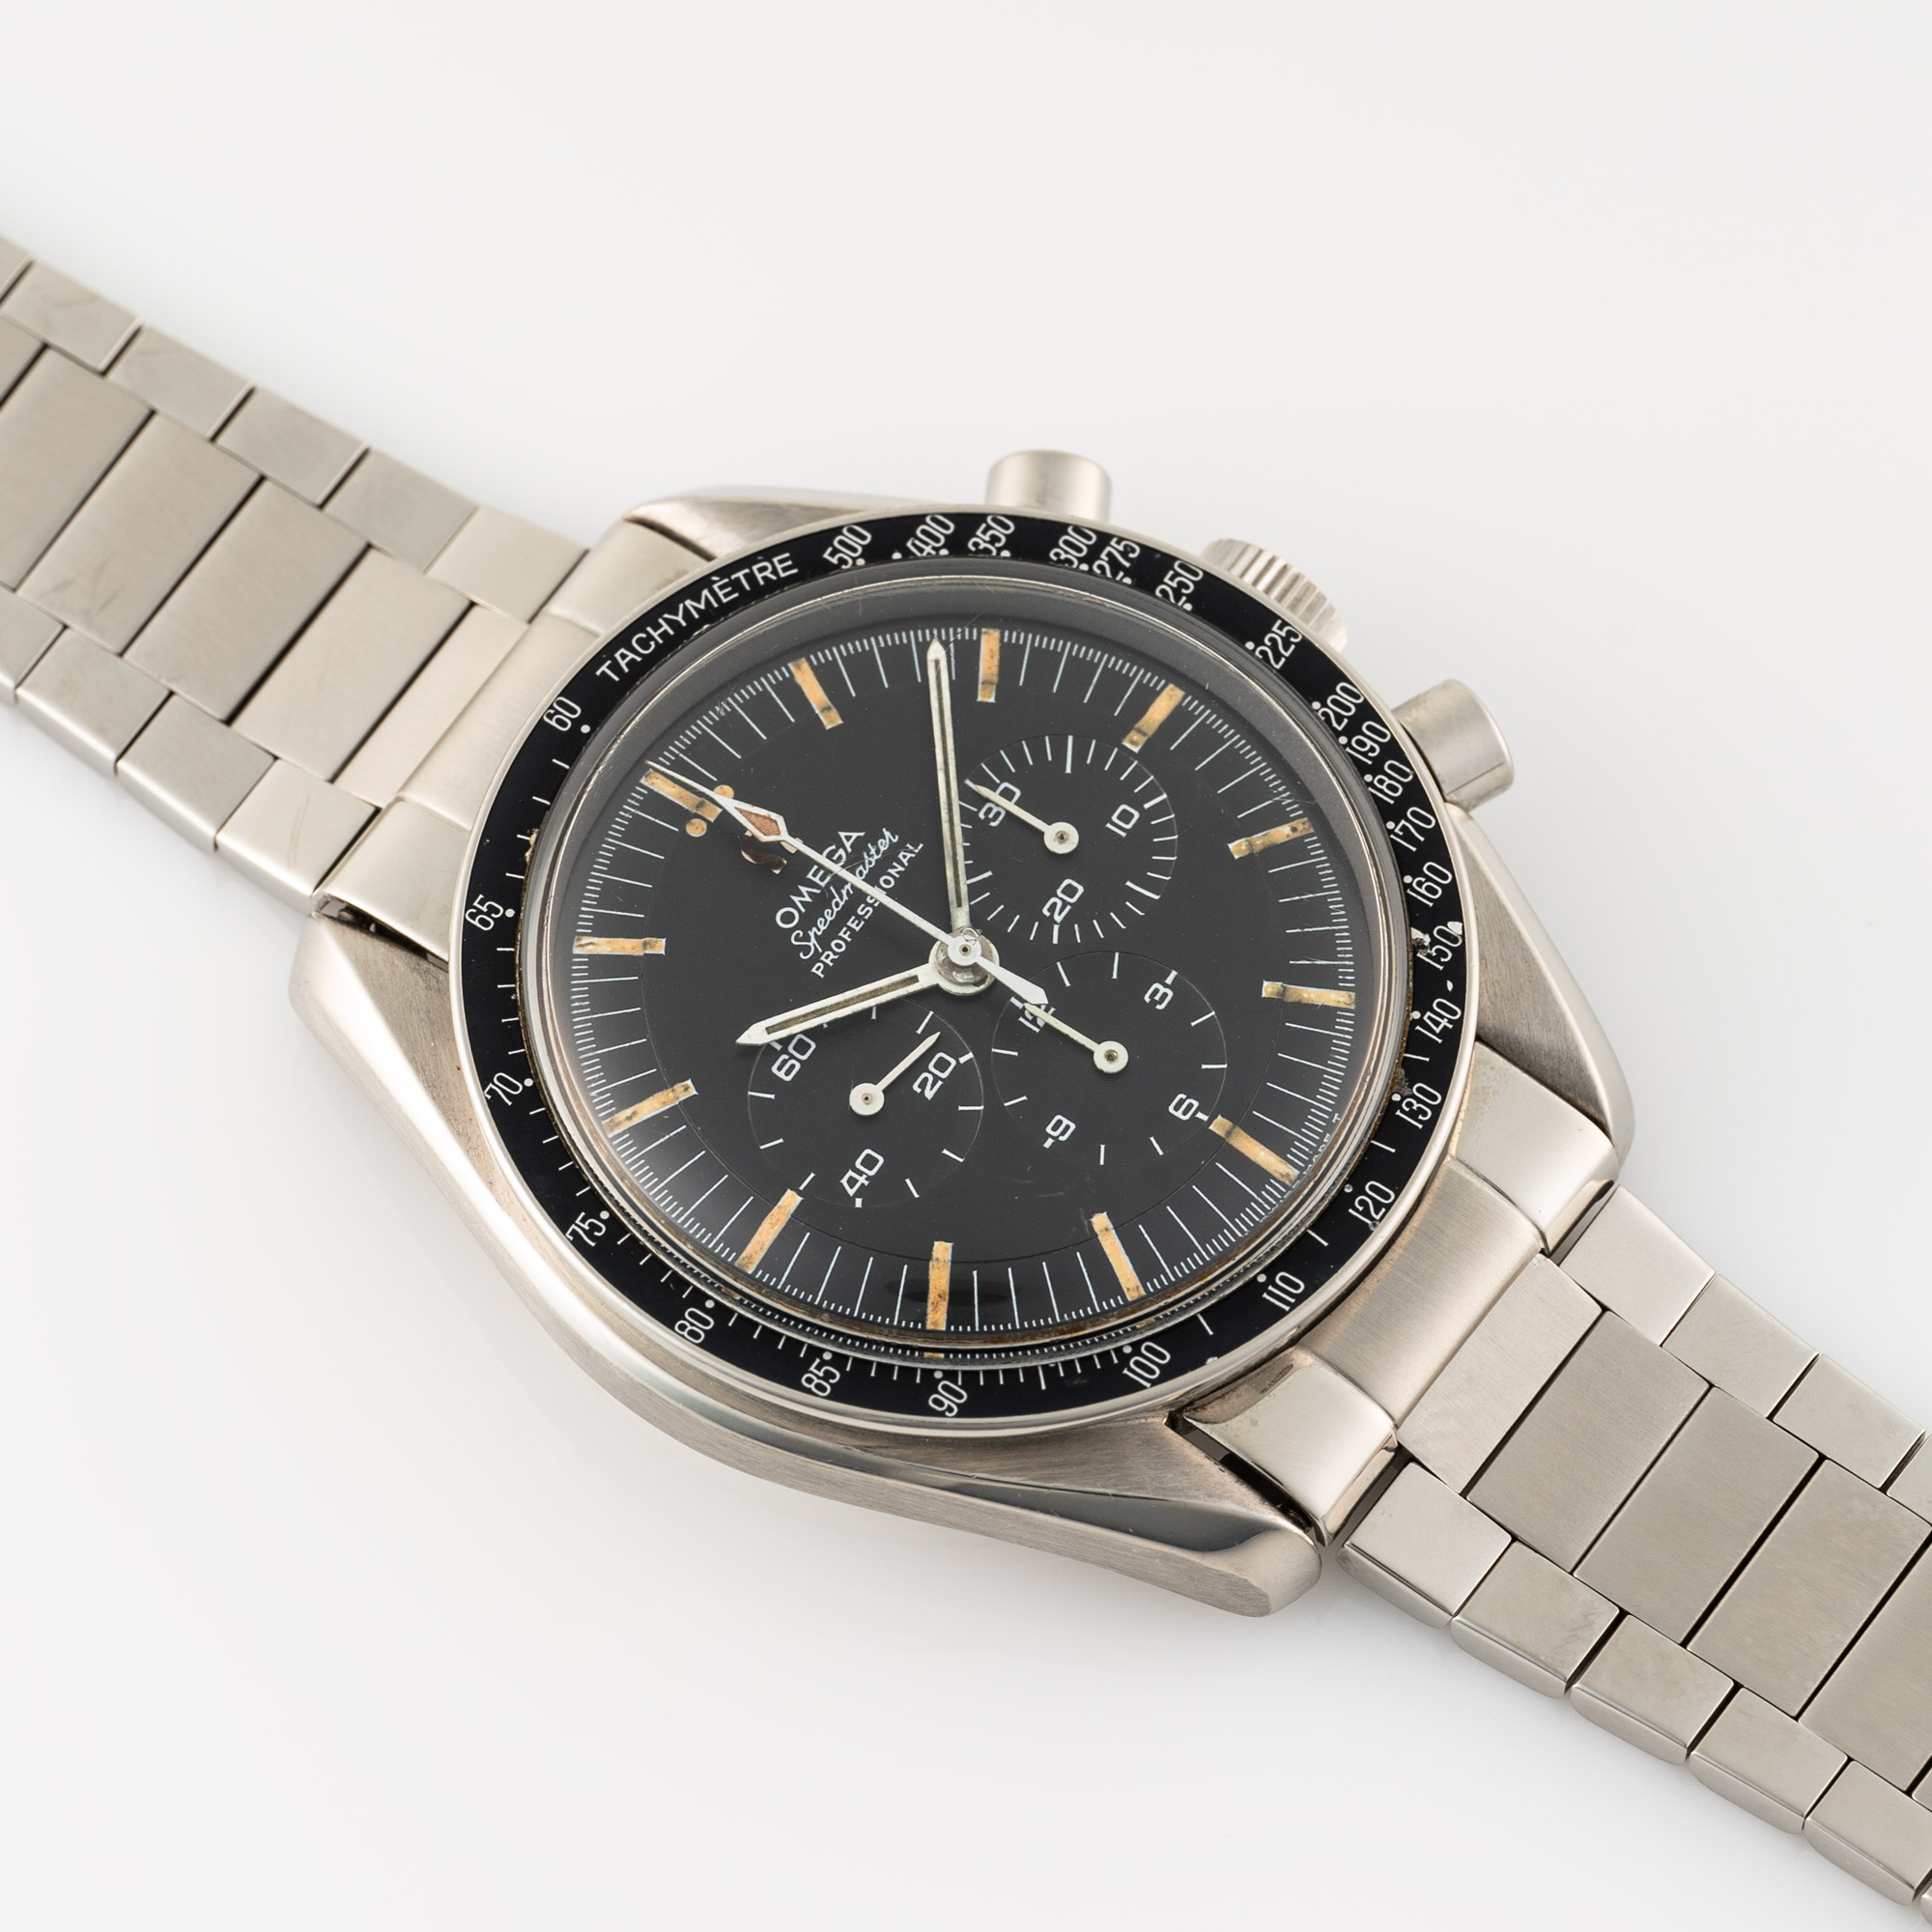 A GENTLEMAN'S SIZE STAINLESS STEEL OMEGA SPEEDMASTER PROFESSIONAL "PRE MOON" CHRONOGRAPH WRIST WATCH - Image 3 of 11